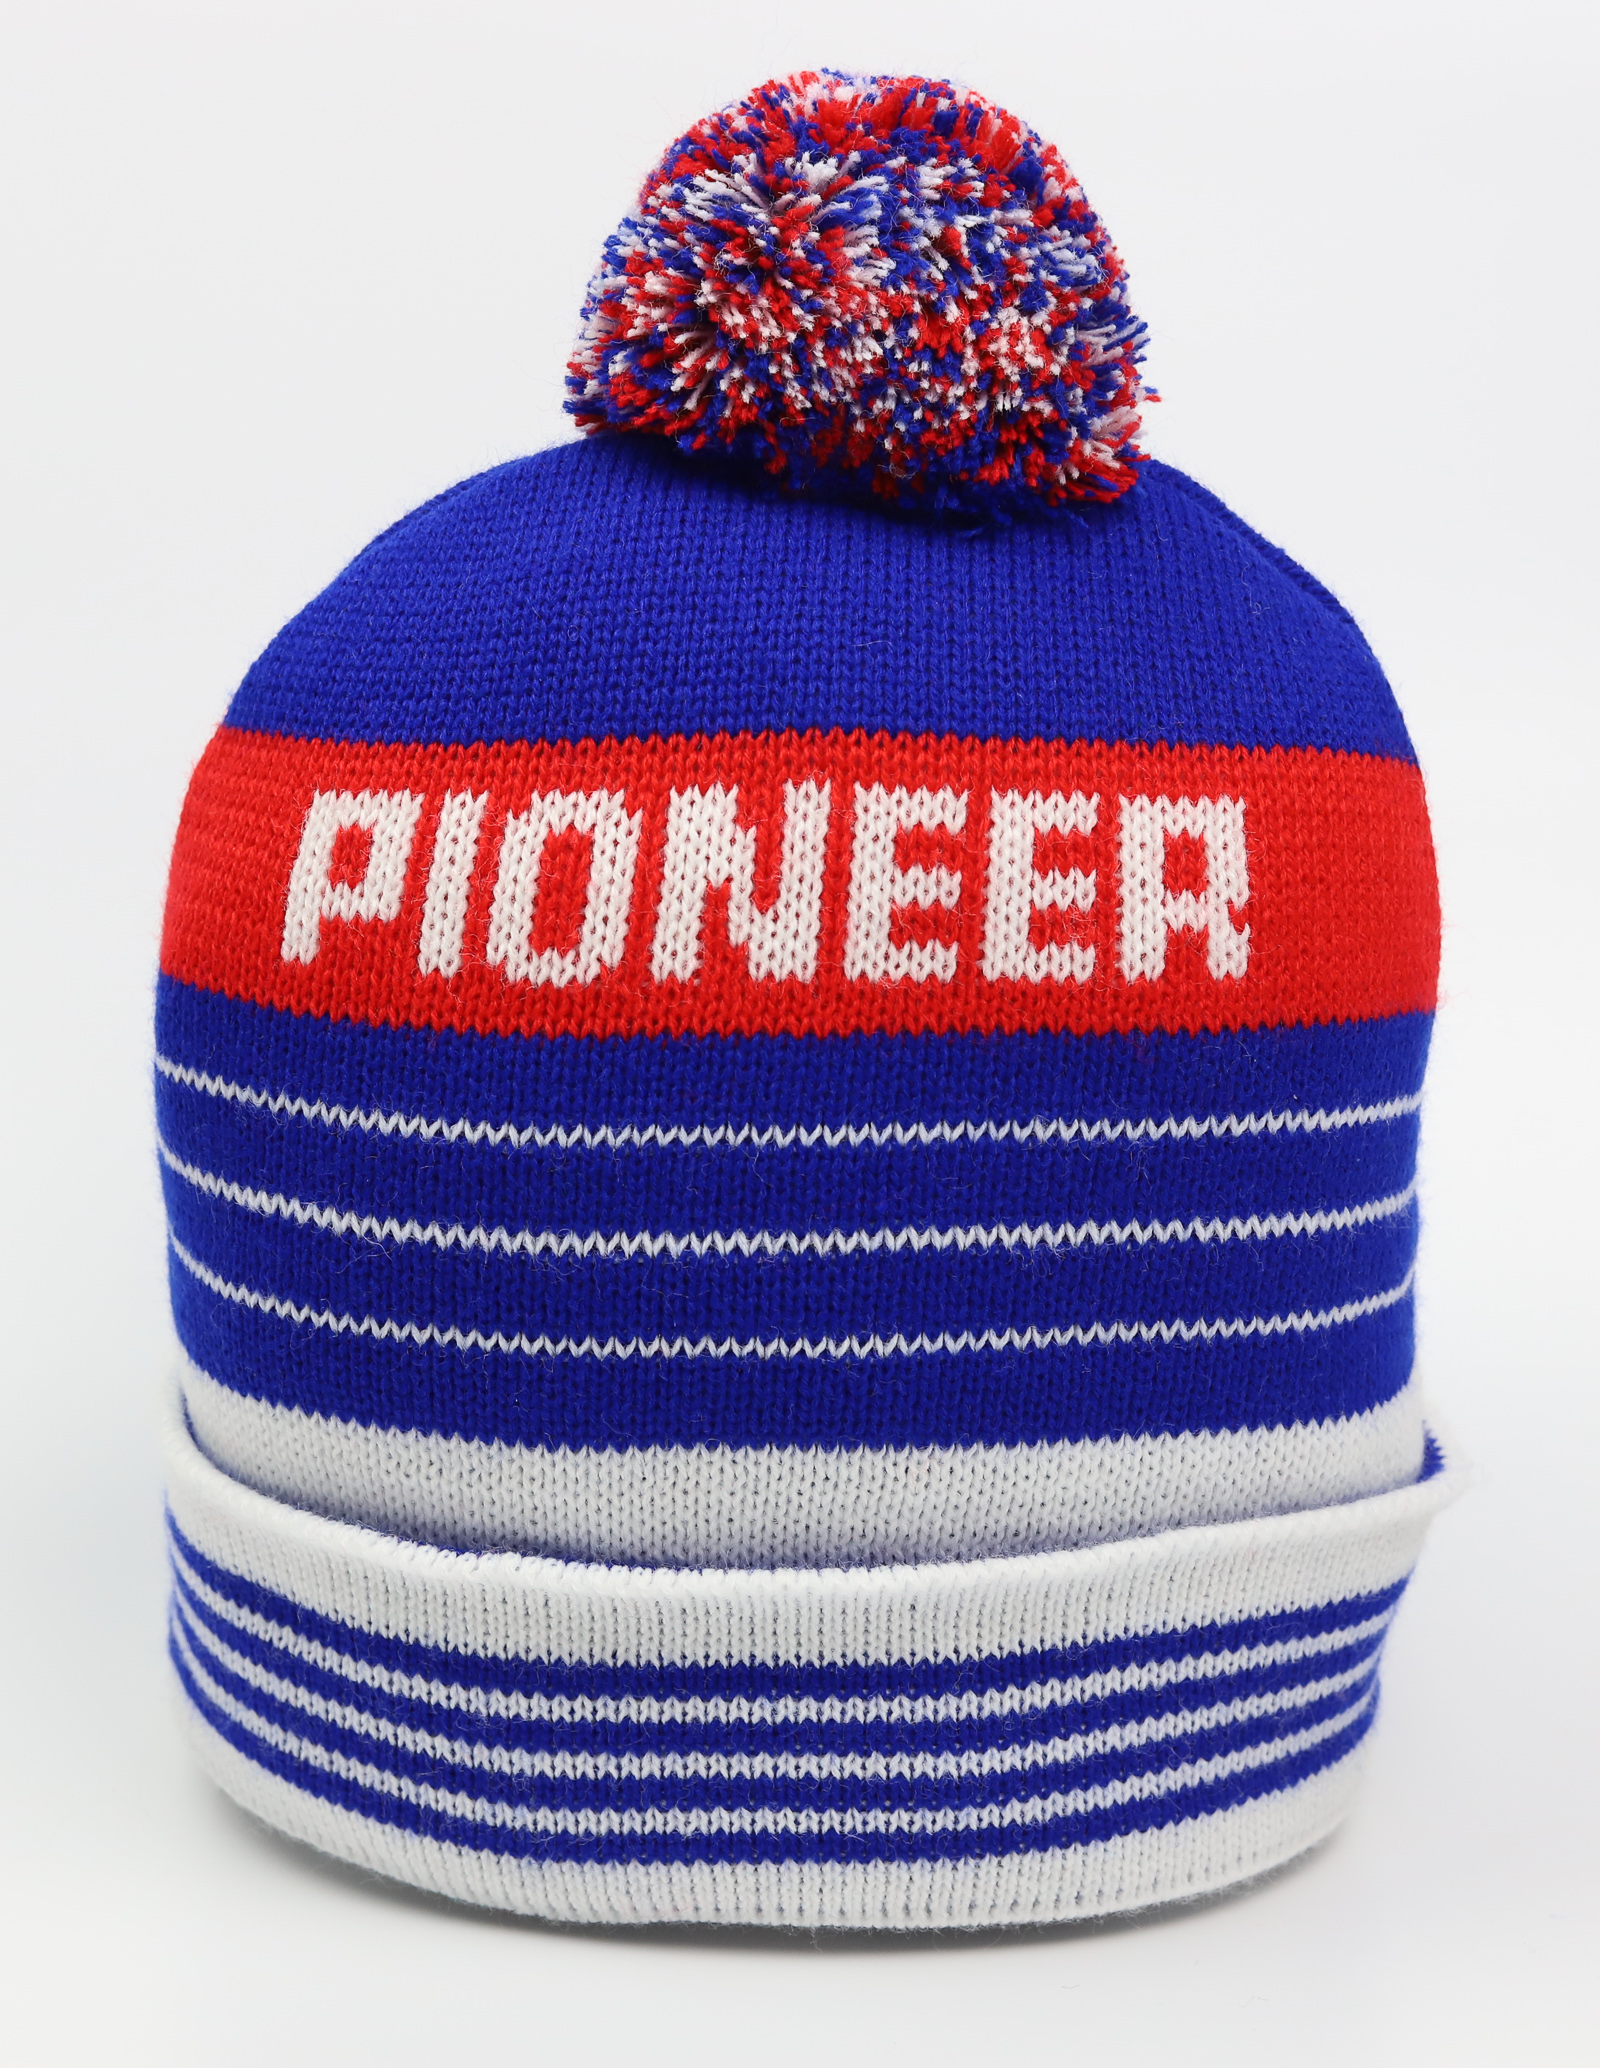 Sports & Outdoors Football Ipswich Town FC Core Beanie Hat Hats & Caps